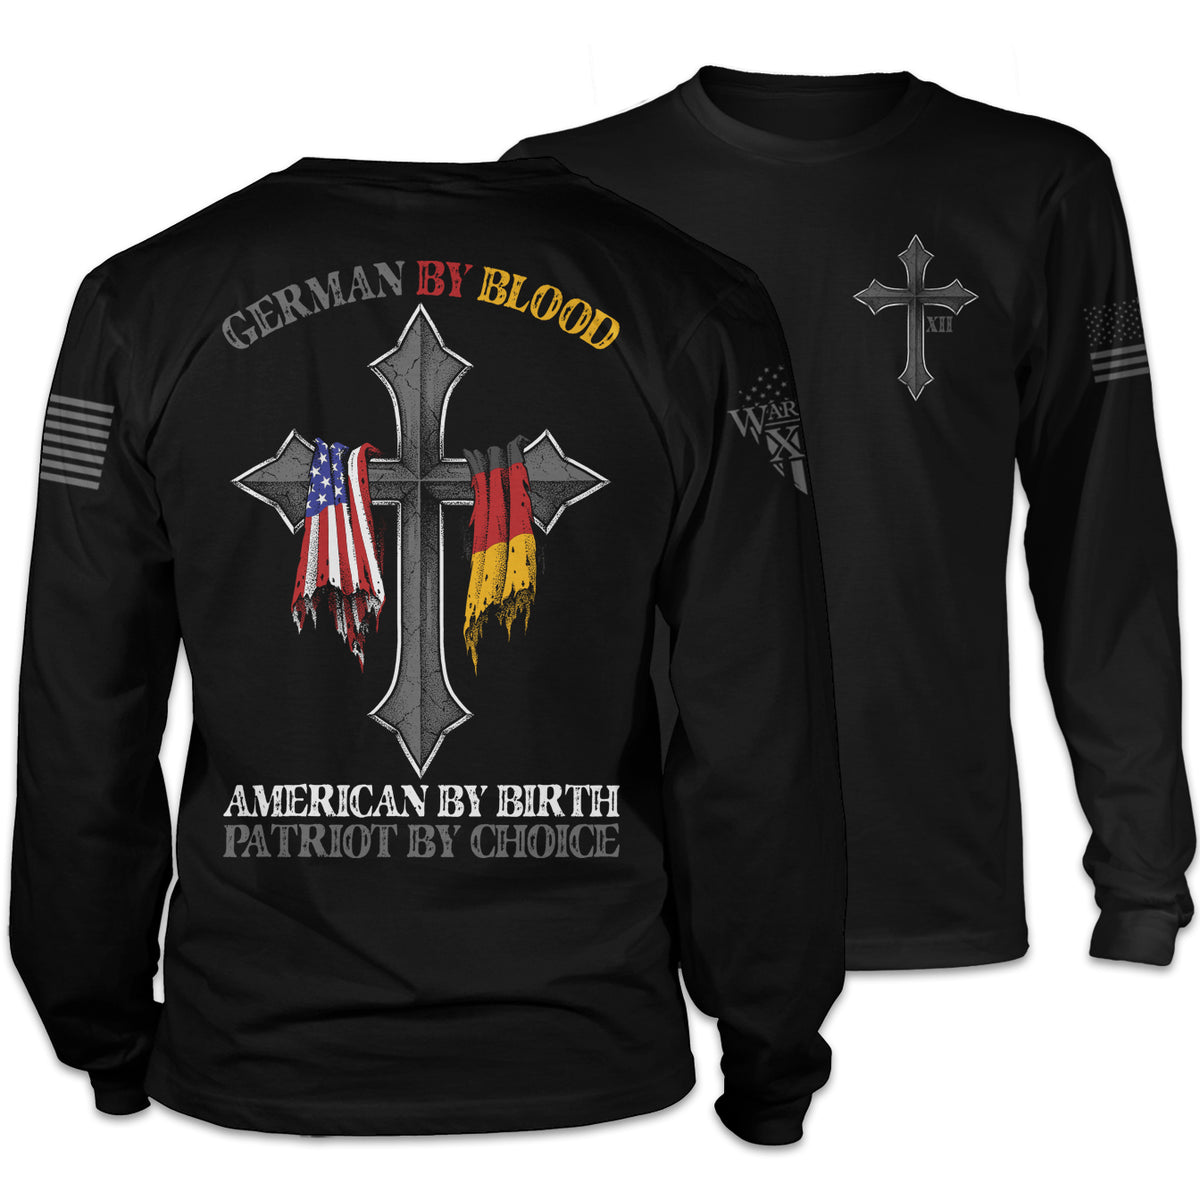 Front & back black long sleeve shirt with the words 'German by blood, American by birth, patriot by choice" and a cross with the German and USA flag hanging over it printed on the shirt.